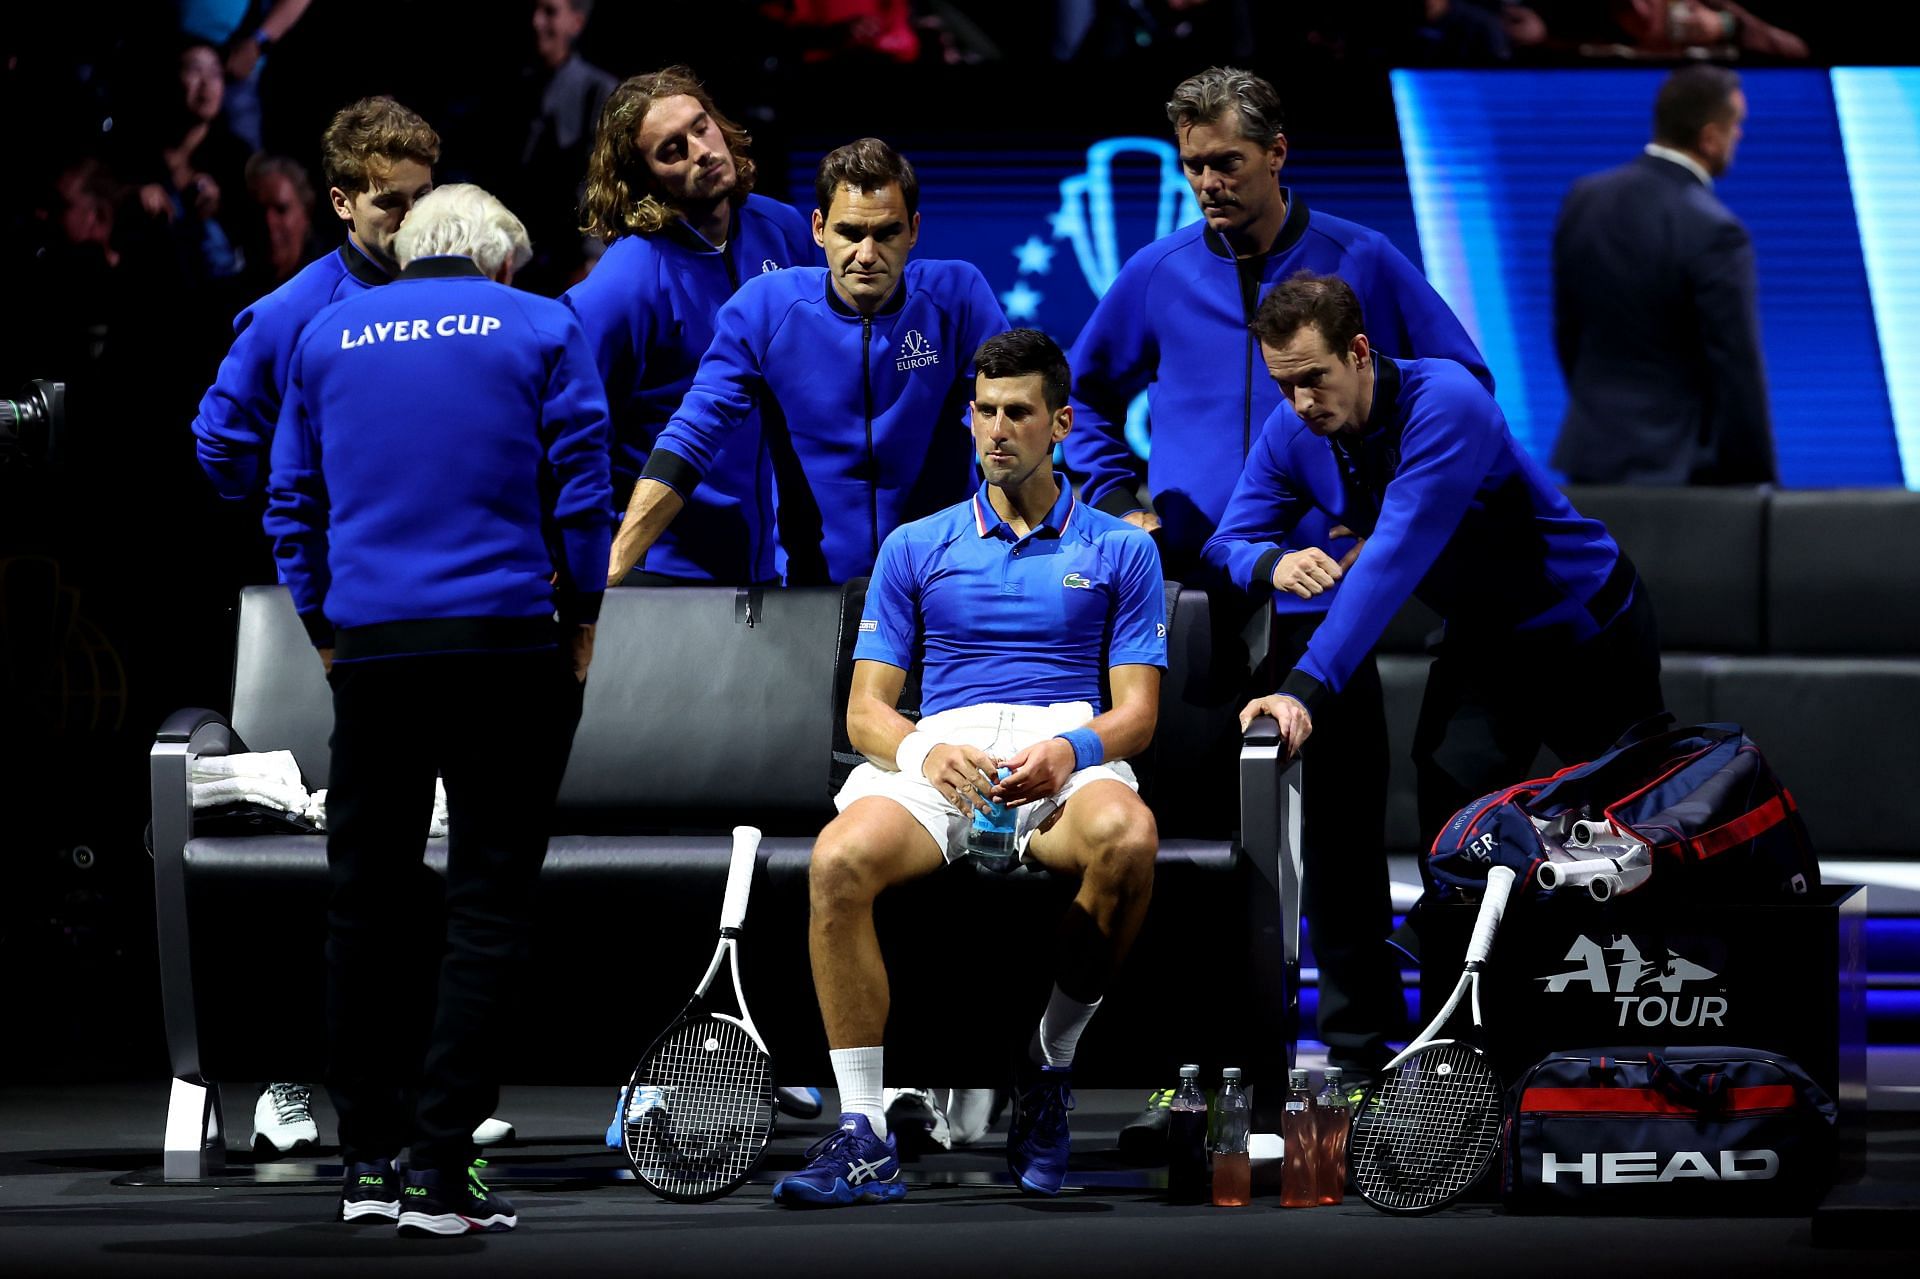 Novak Djokovic is representing Team Europe at the 2022 Laver Cup.